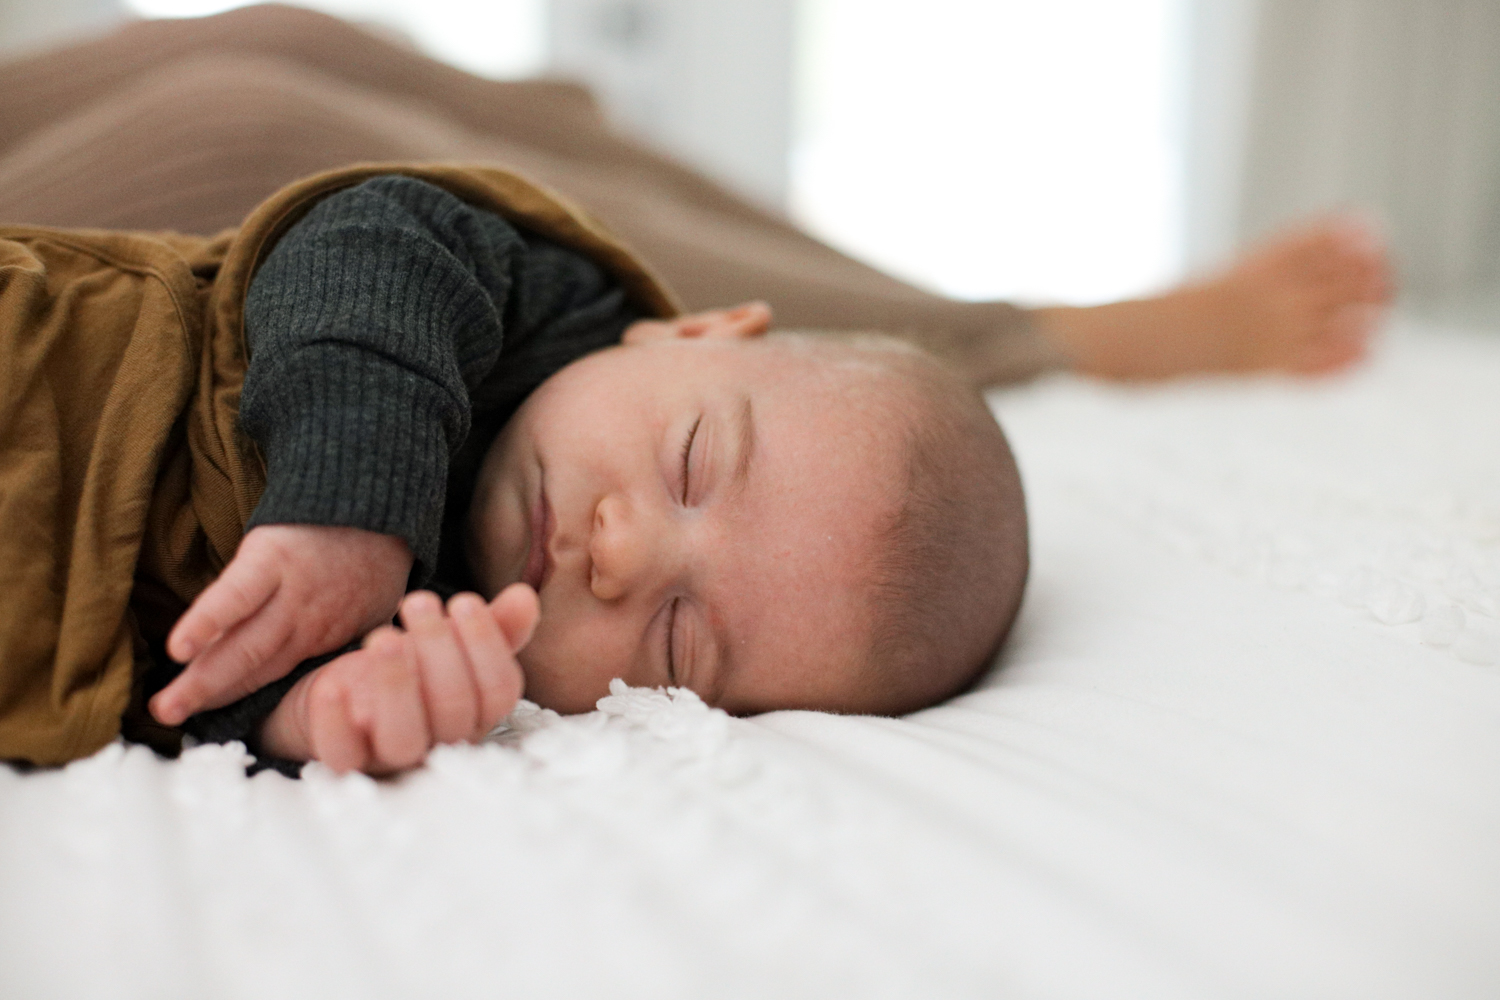 helping your baby fall asleep better with these 7 tips